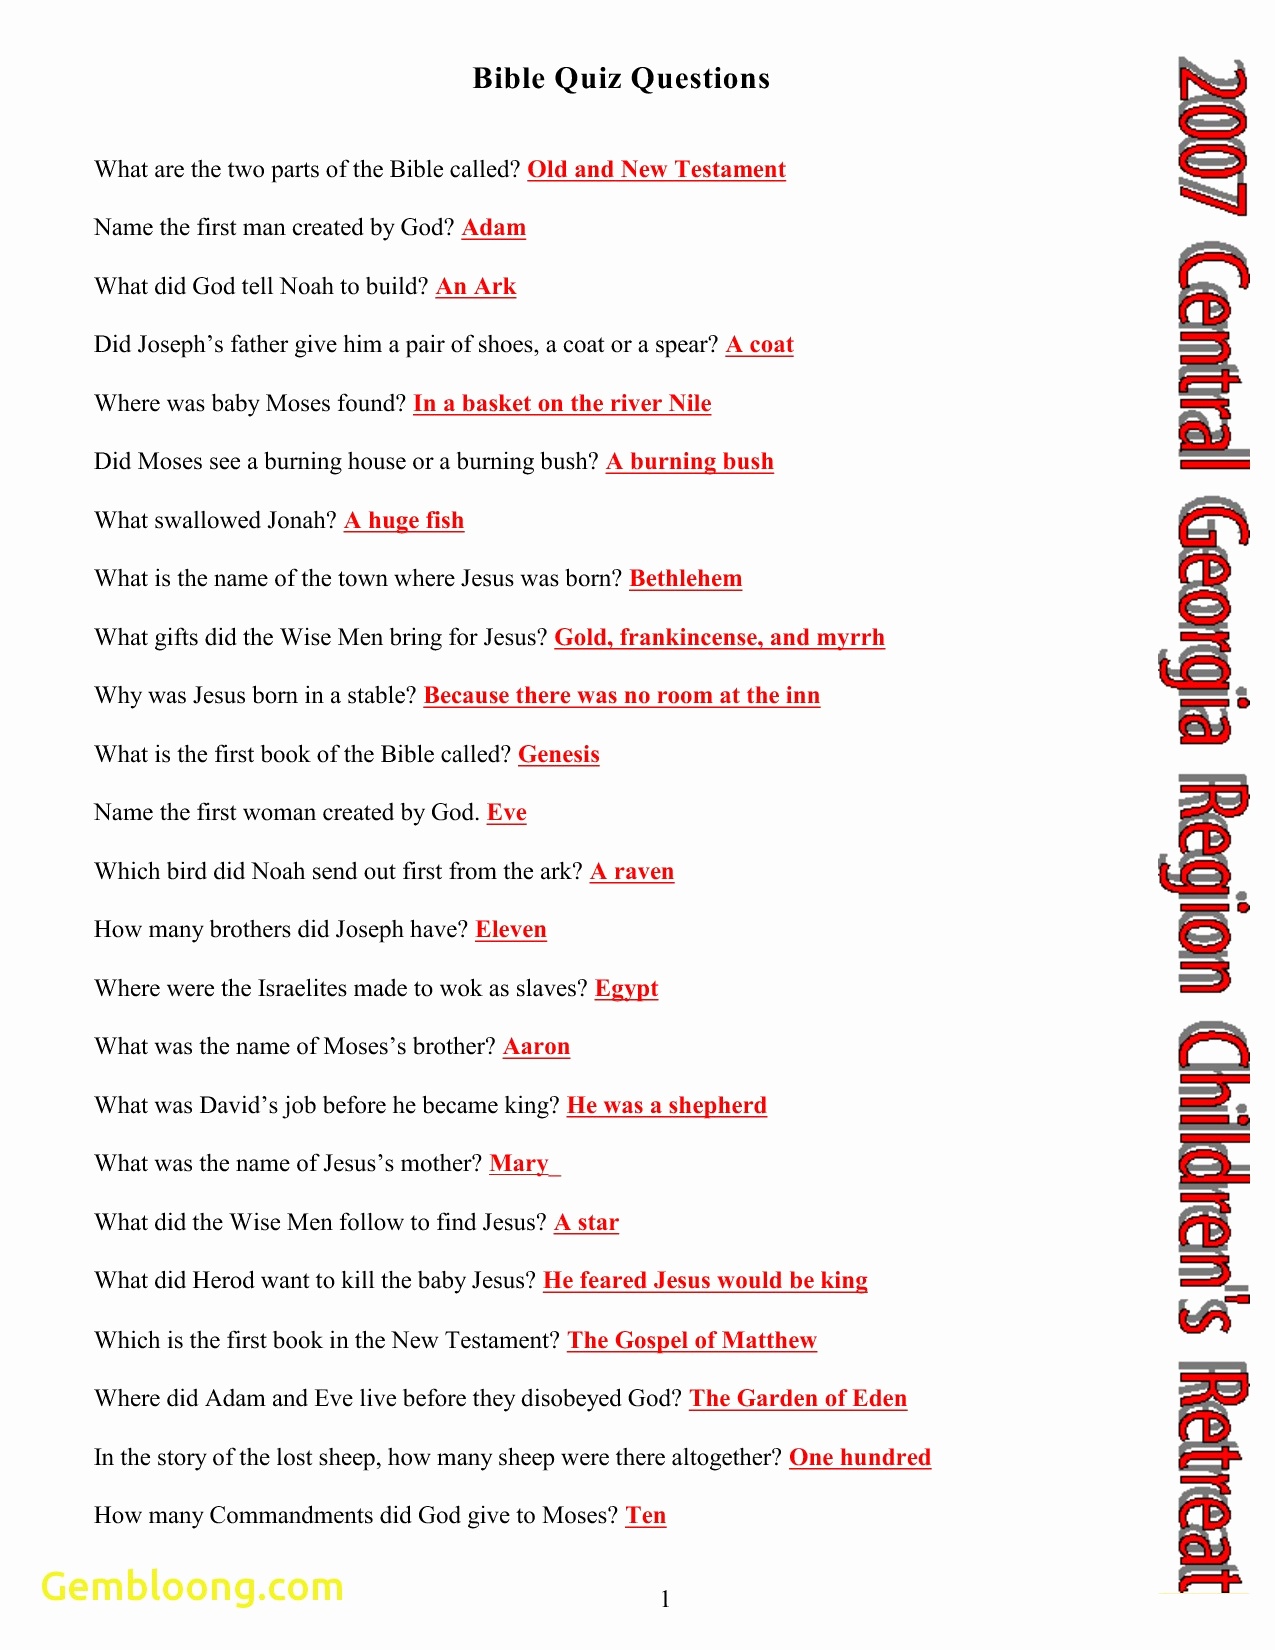 Bible Trivia For Adults 35 Images Bible Trivia 6 95 Easter Quiz On Resurrection Of Jesus Free Printable Bible Trivia For Adults Free Printable